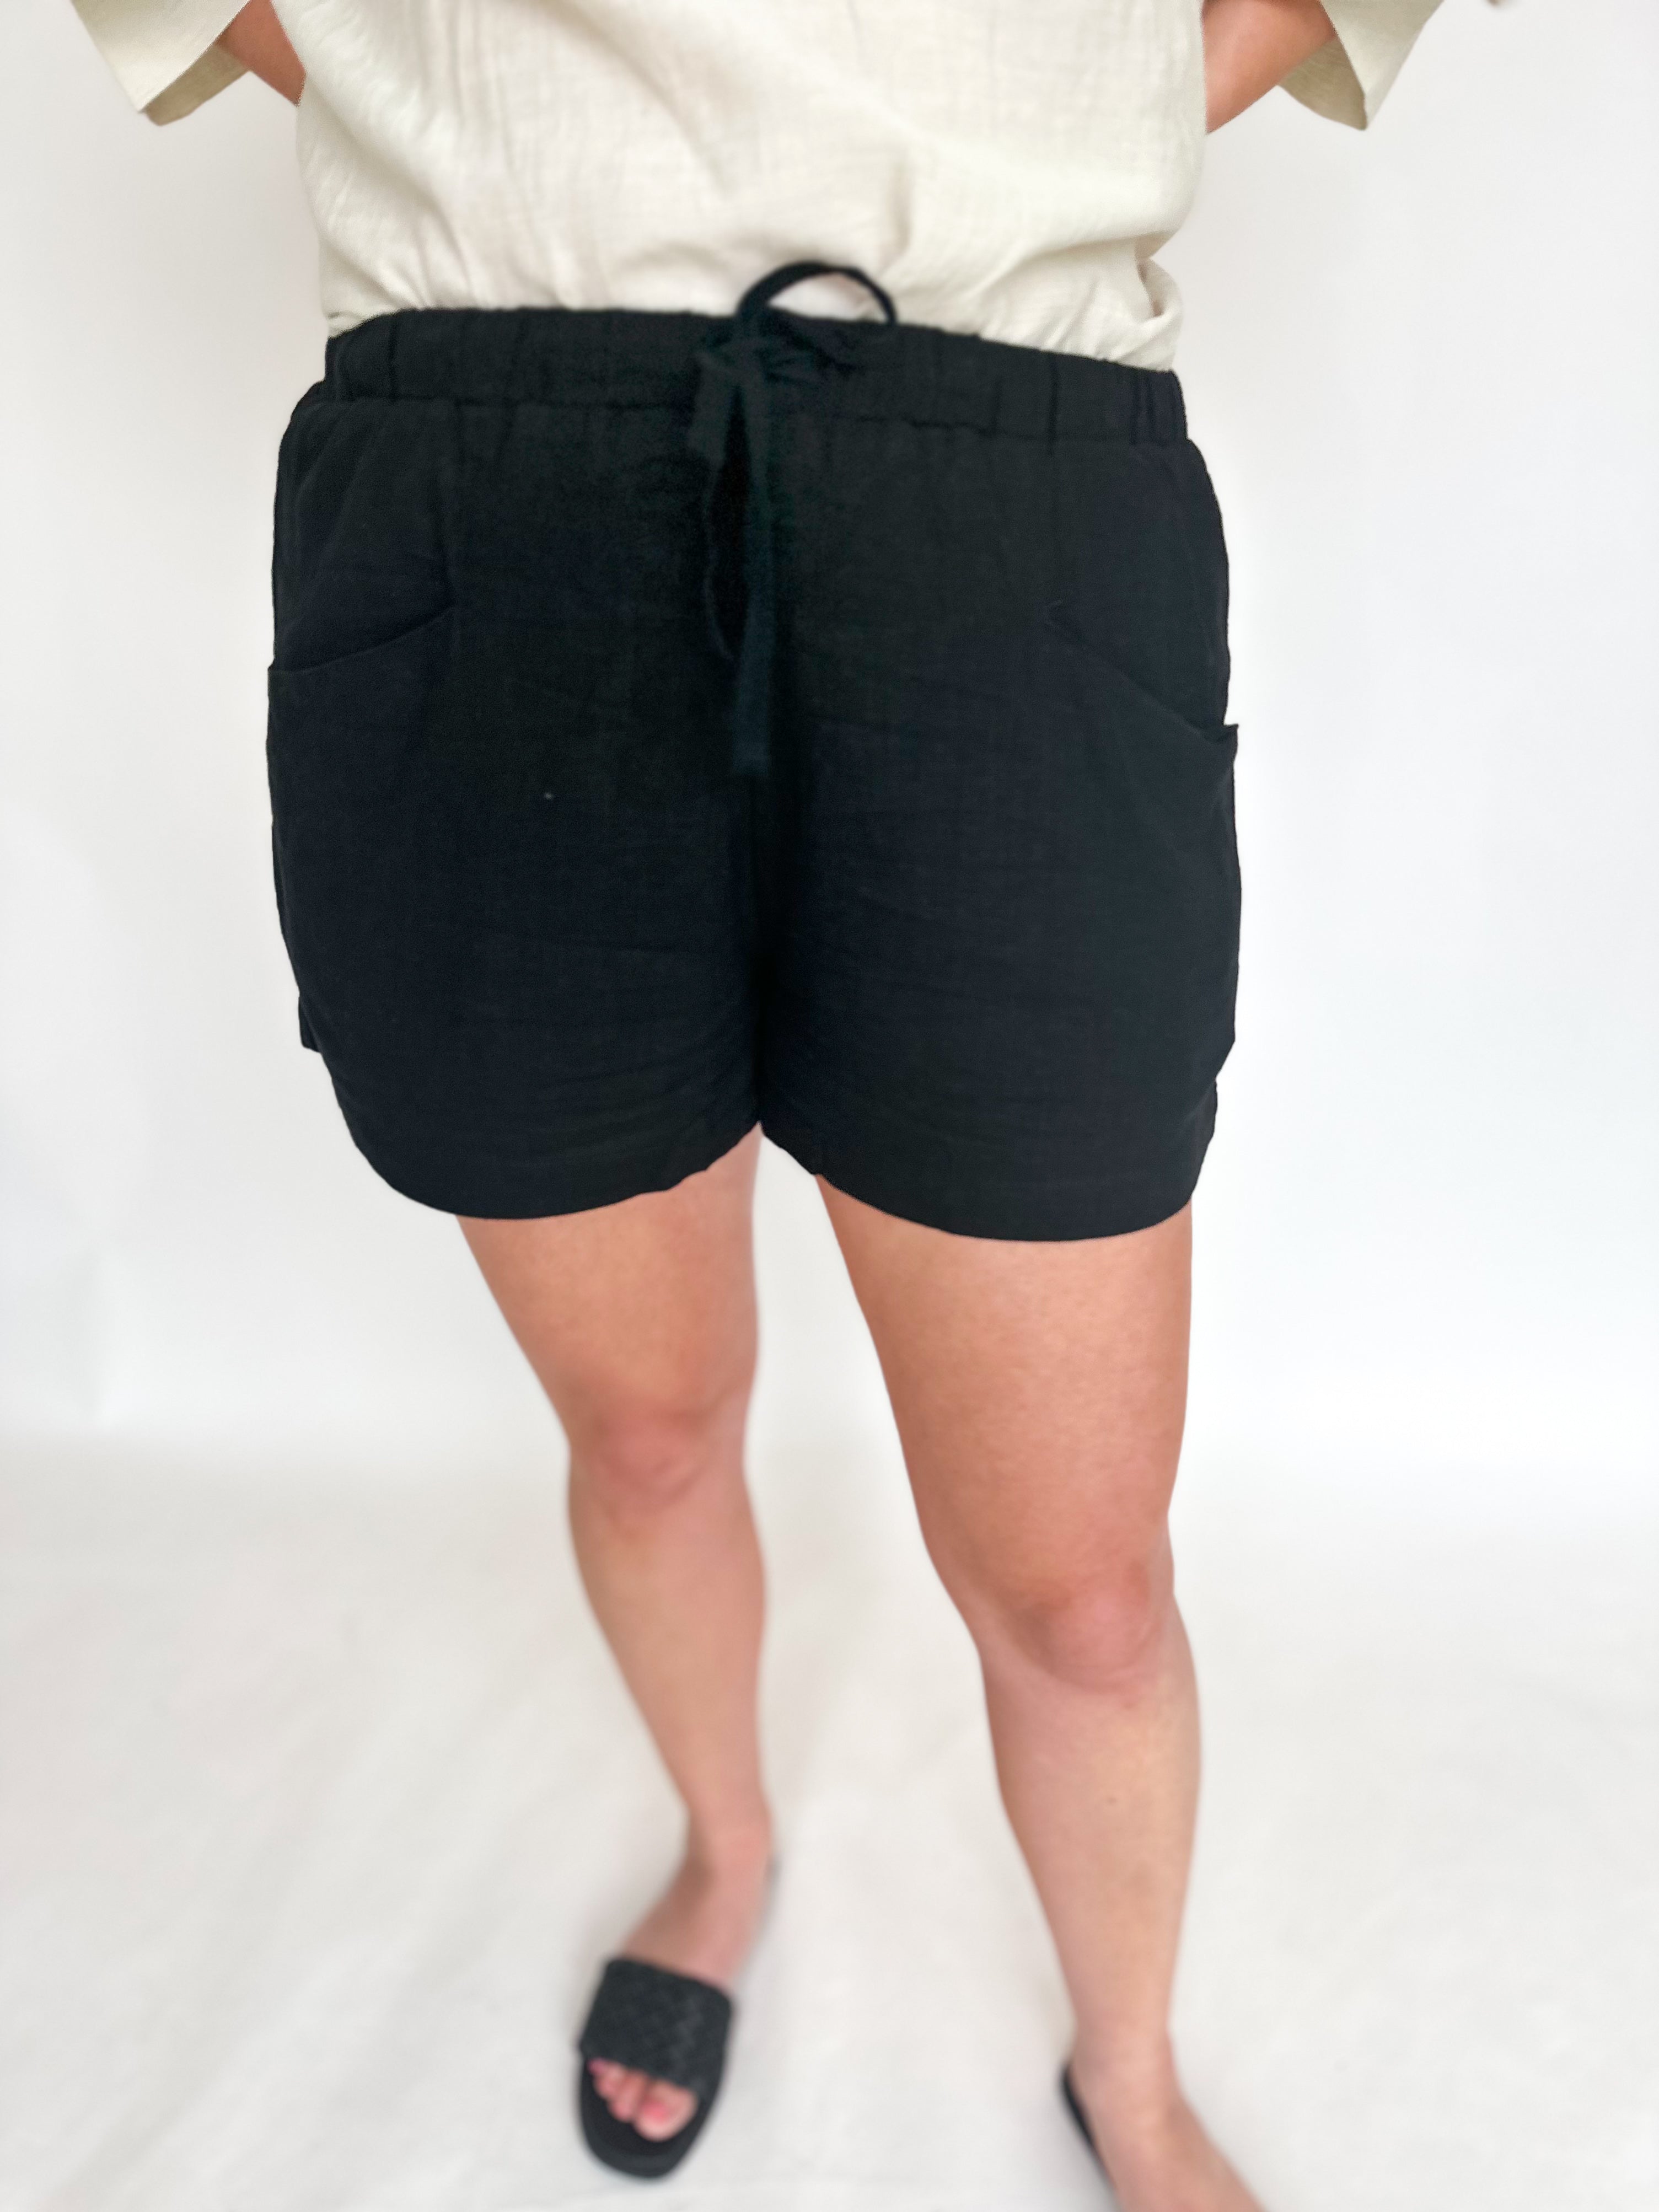 Slouchy Pocket Beach Shorts-410 Shorts/Skirts-ALLIE ROSE-July & June Women's Fashion Boutique Located in San Antonio, Texas